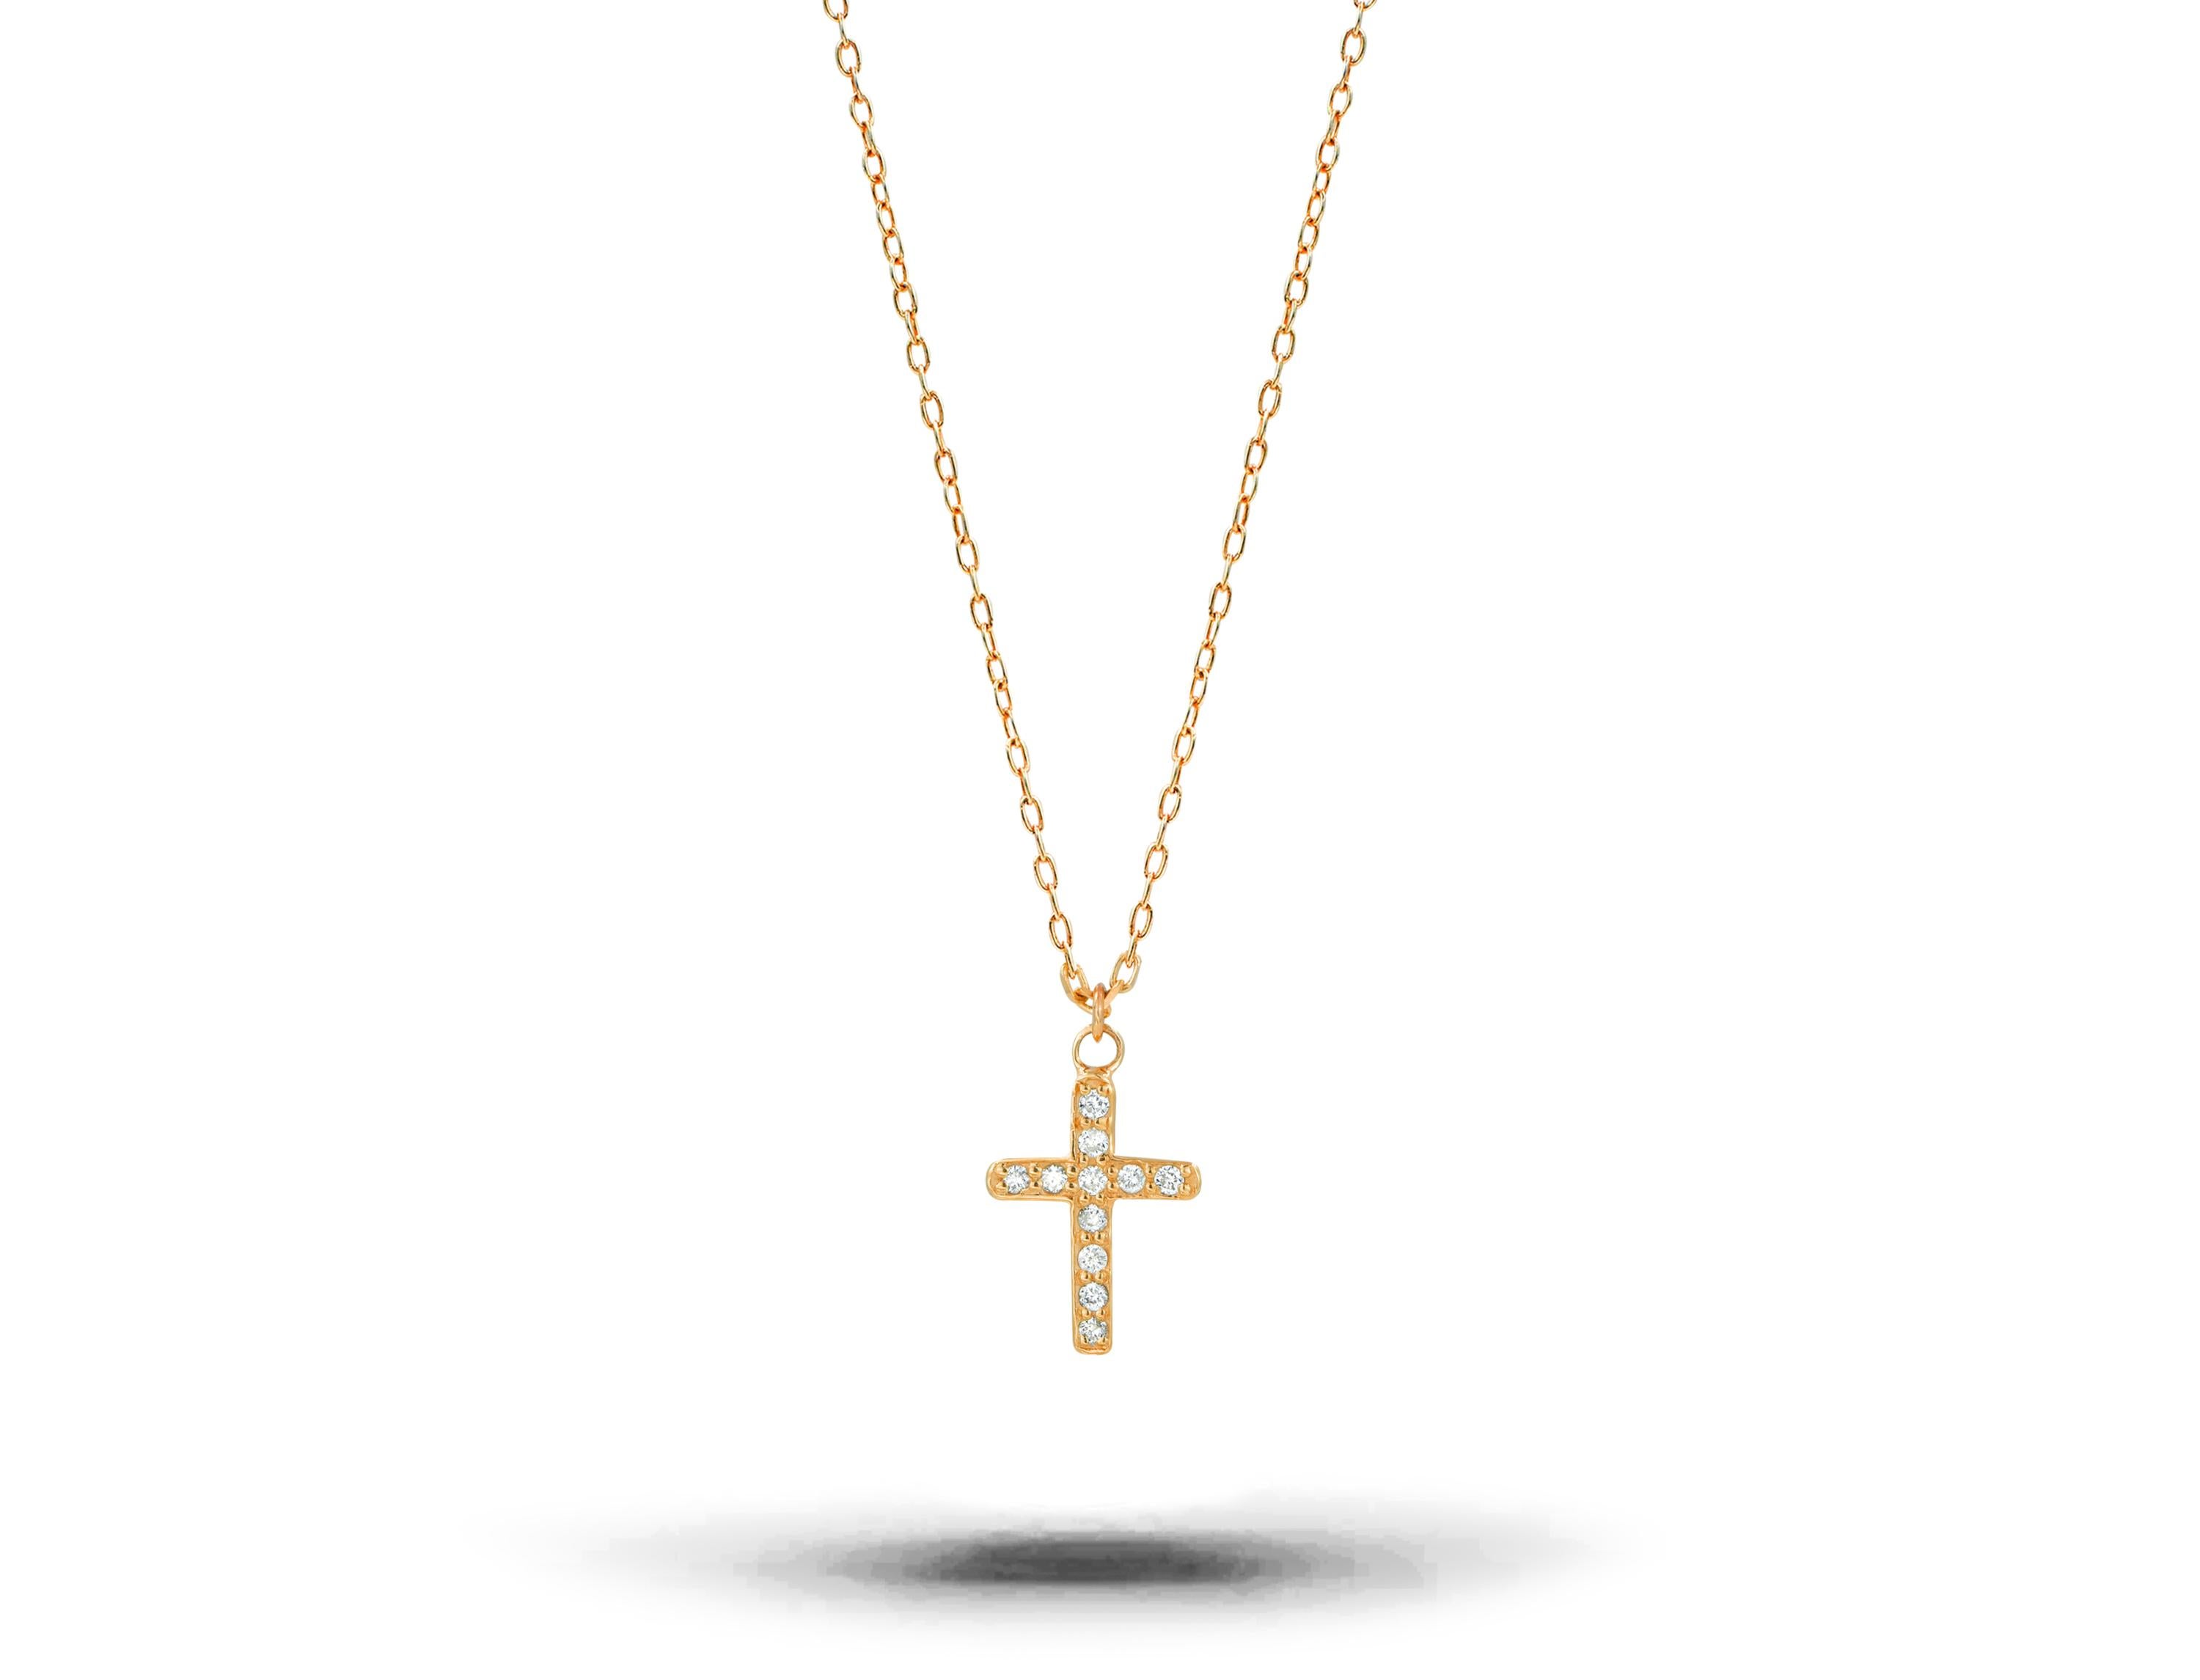 Diamond Cross Necklace is made of 18k solid gold available in three colors, White Gold / Rose Gold / Yellow Gold.

Lightweight and gorgeous natural genuine round cut diamond. Each diamond is hand selected by me to ensure quality and set by a master